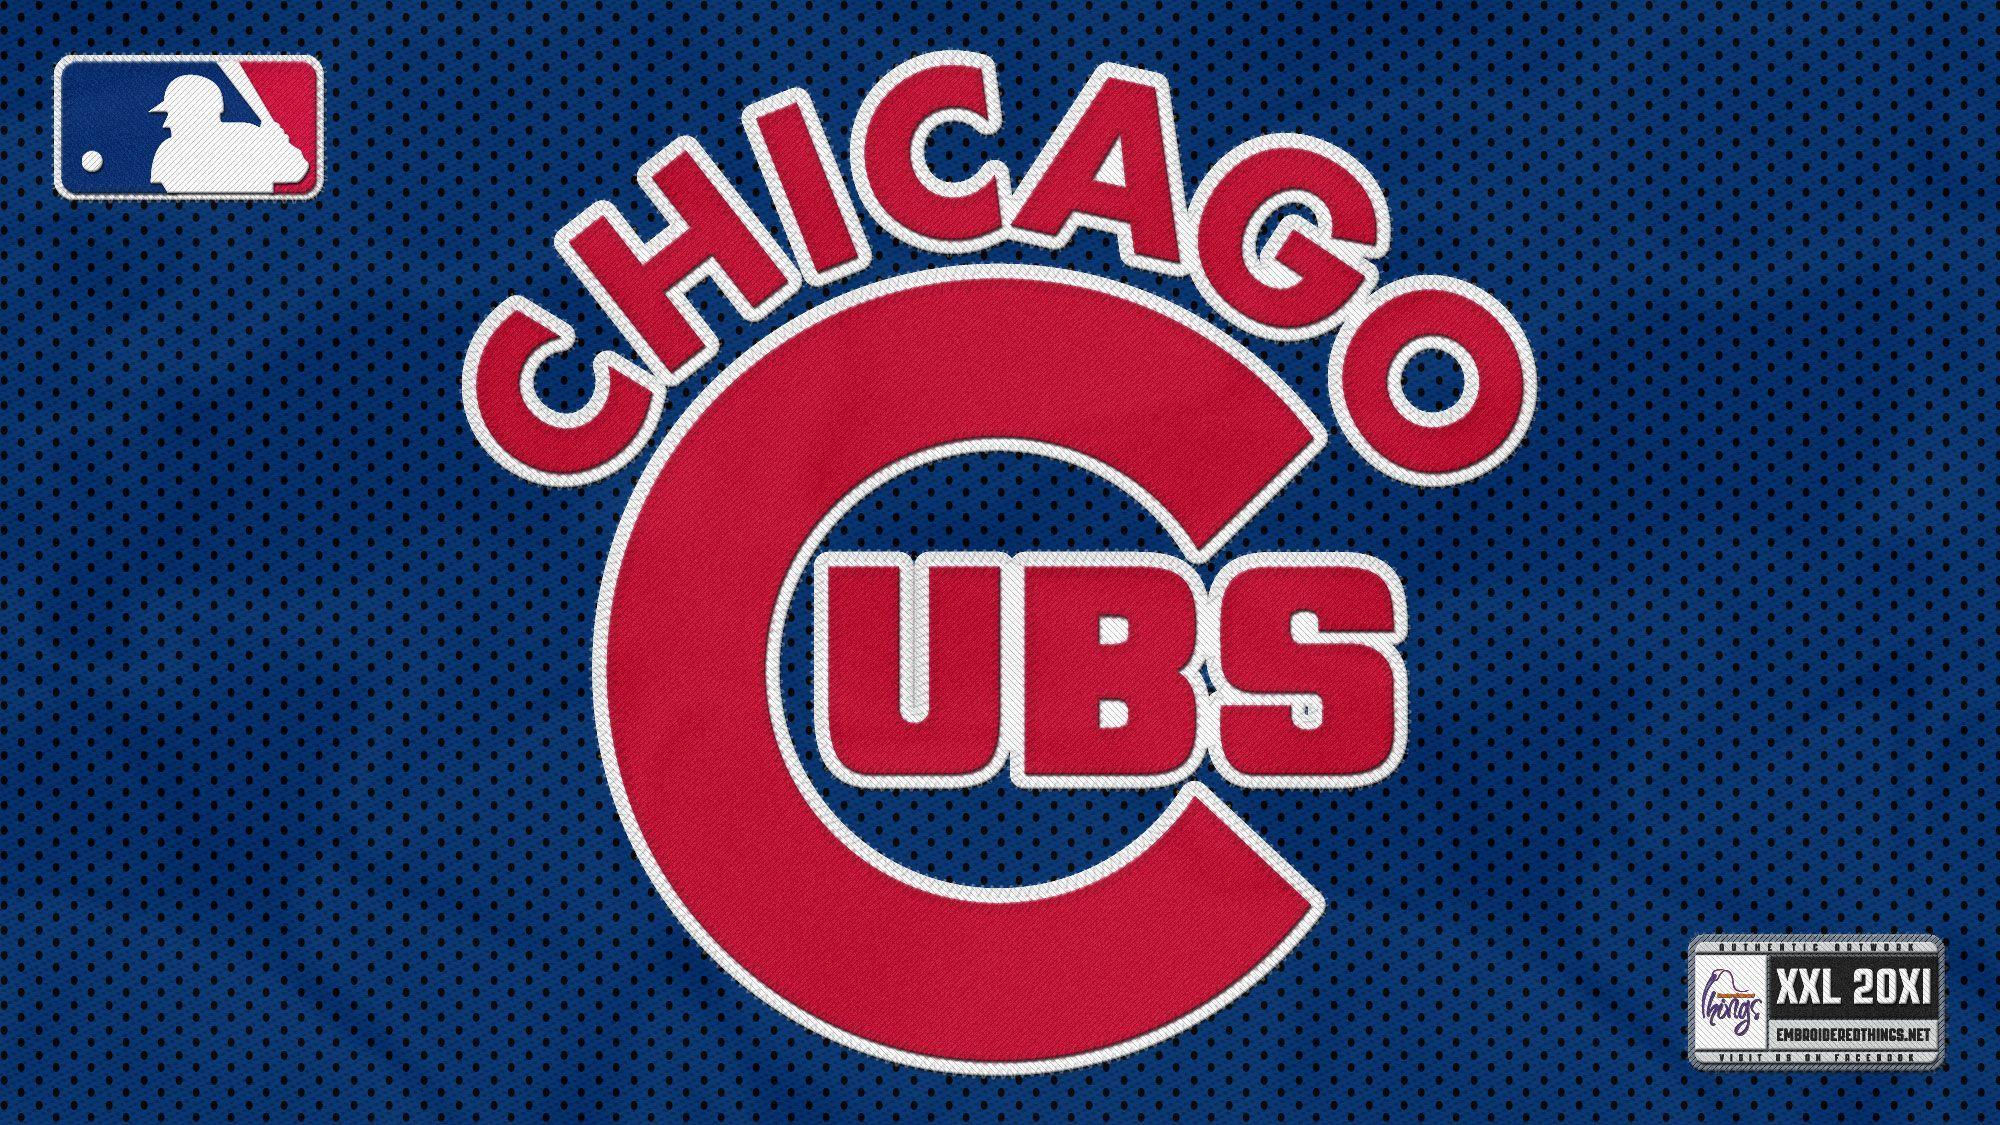 Chicago Cubs HD image